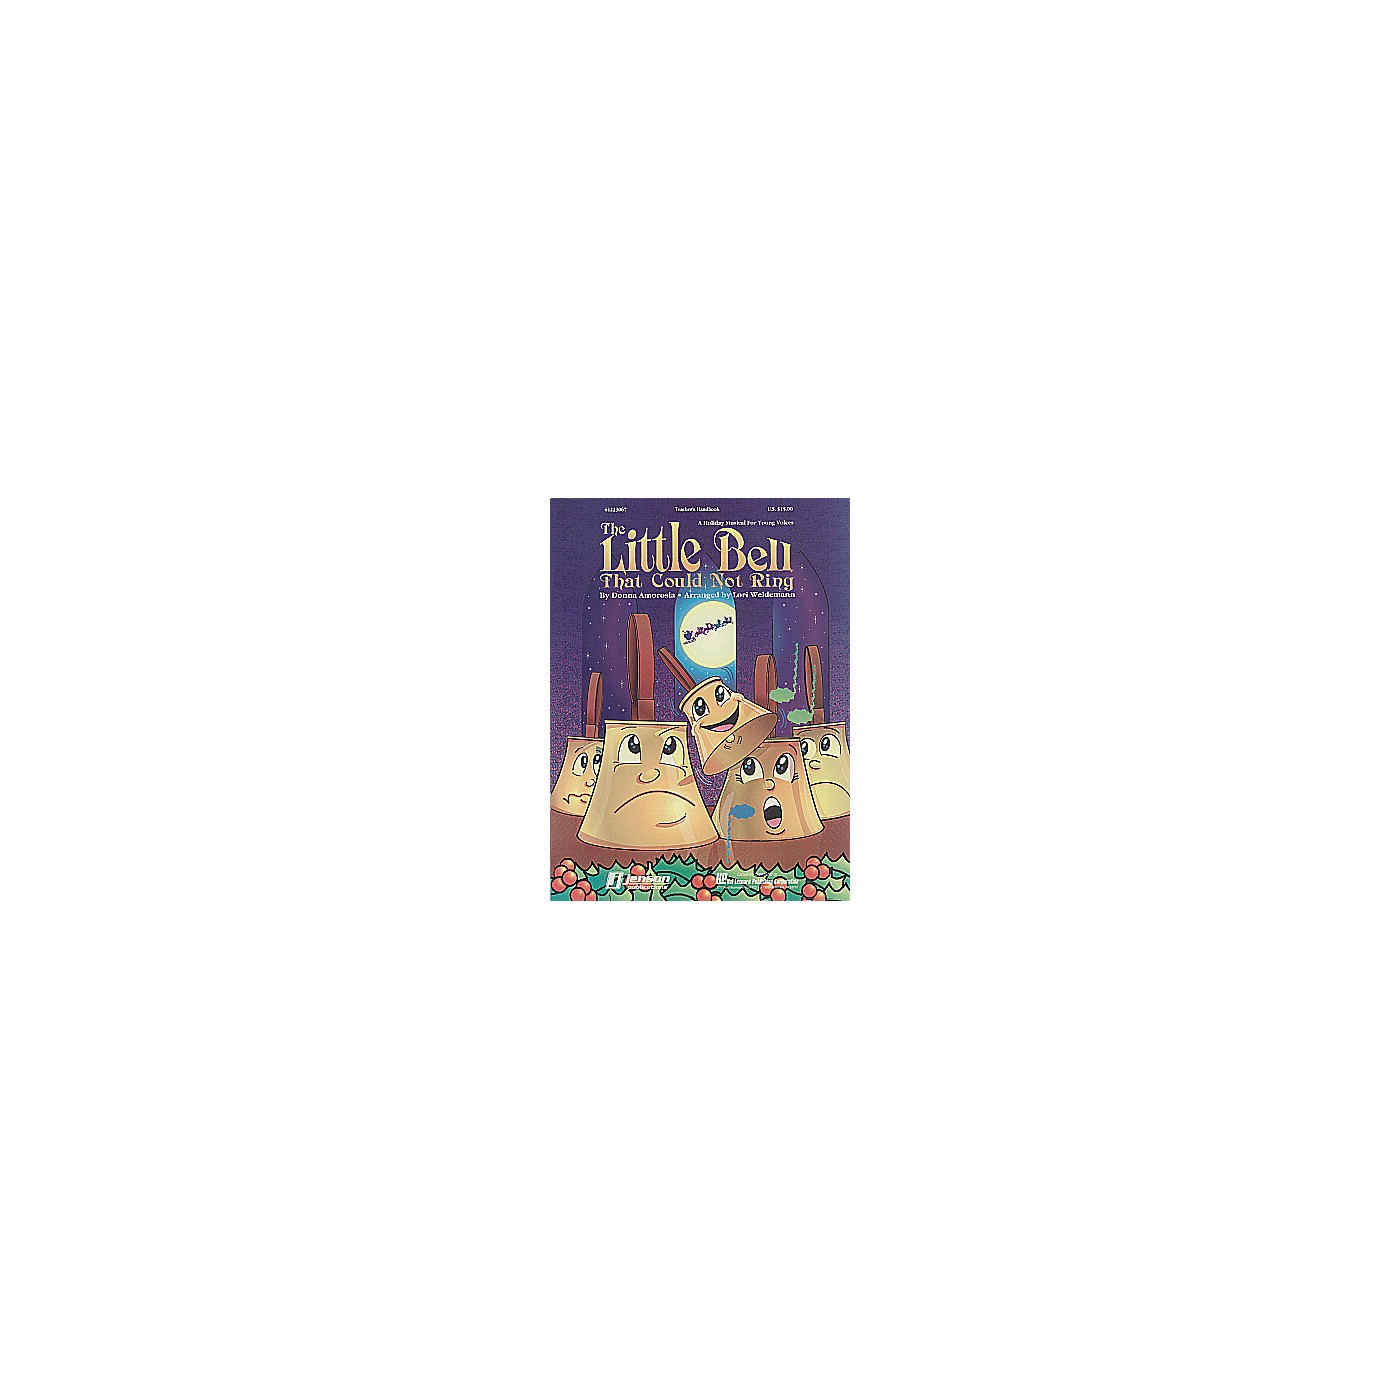 Hal Leonard The Little Bell That Could Not Ring - Teacher Edition thumbnail